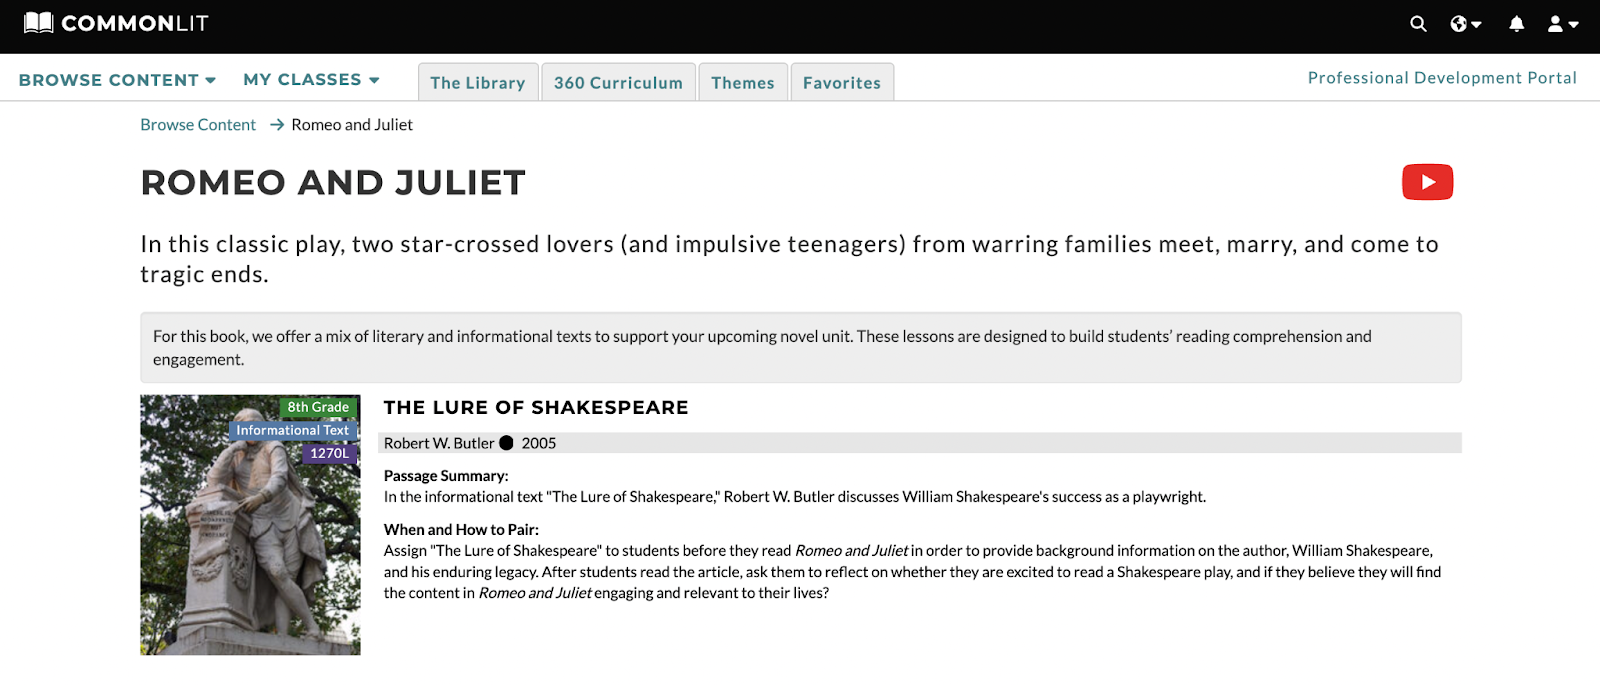 A screenshot of the first lesson on the Book Pairing page for Romeo and Juliet